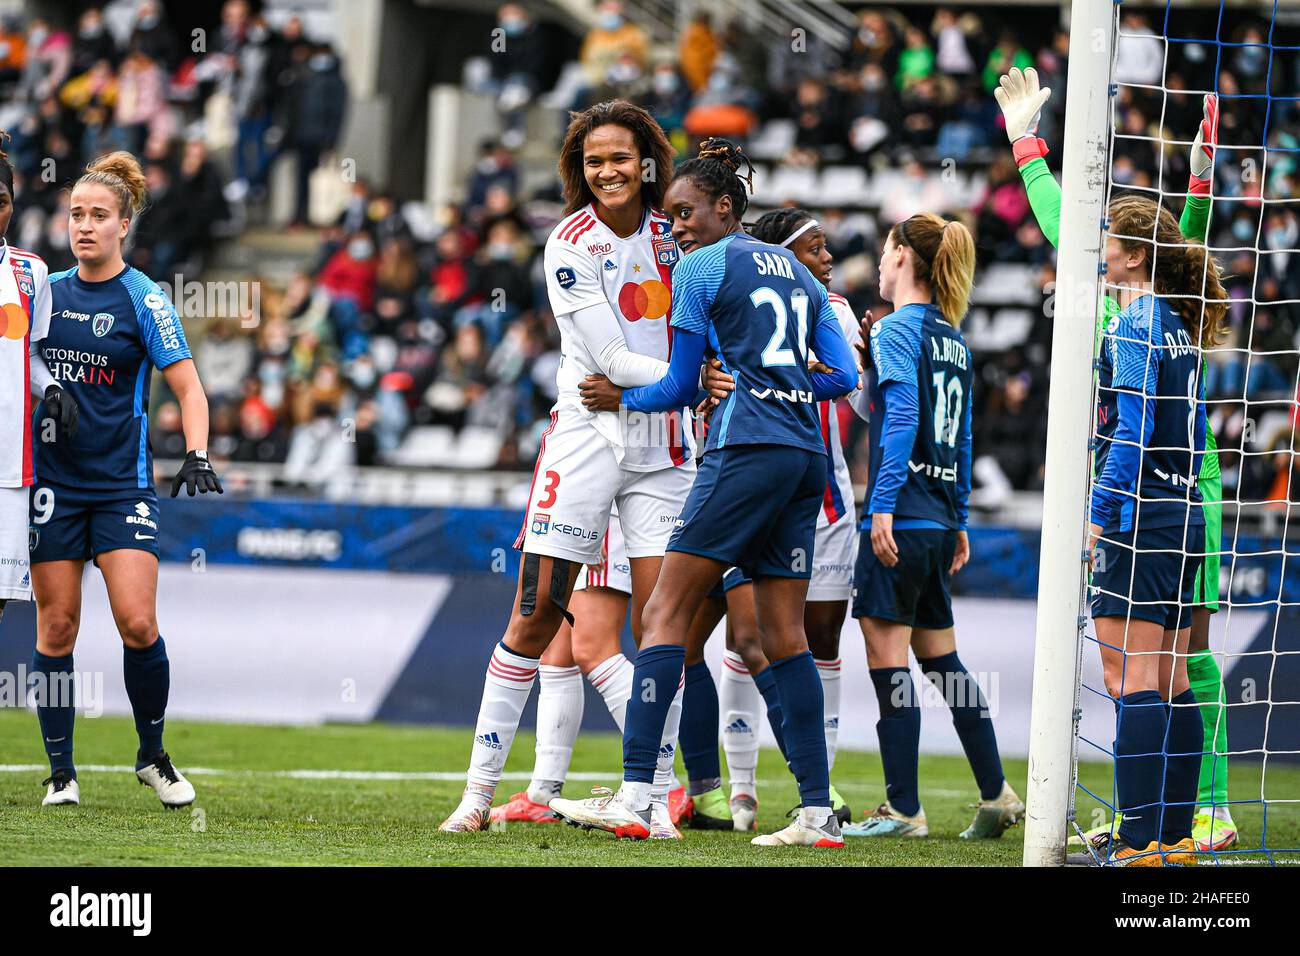 Paris, France. 12th Dec, 2021. Wendie Renard of Olympique Lyonnais and Ouleymata Sarr of Paris FC during the Women's French championship, D1 Arkema football match between Paris FC and Olympique Lyonnais (OL) on December 12, 2021 at Charlety Stadium in Paris, France. Photo by Victor Joly/ABACAPRESS.COM Credit: Victor Joly/Alamy Live News Stock Photo